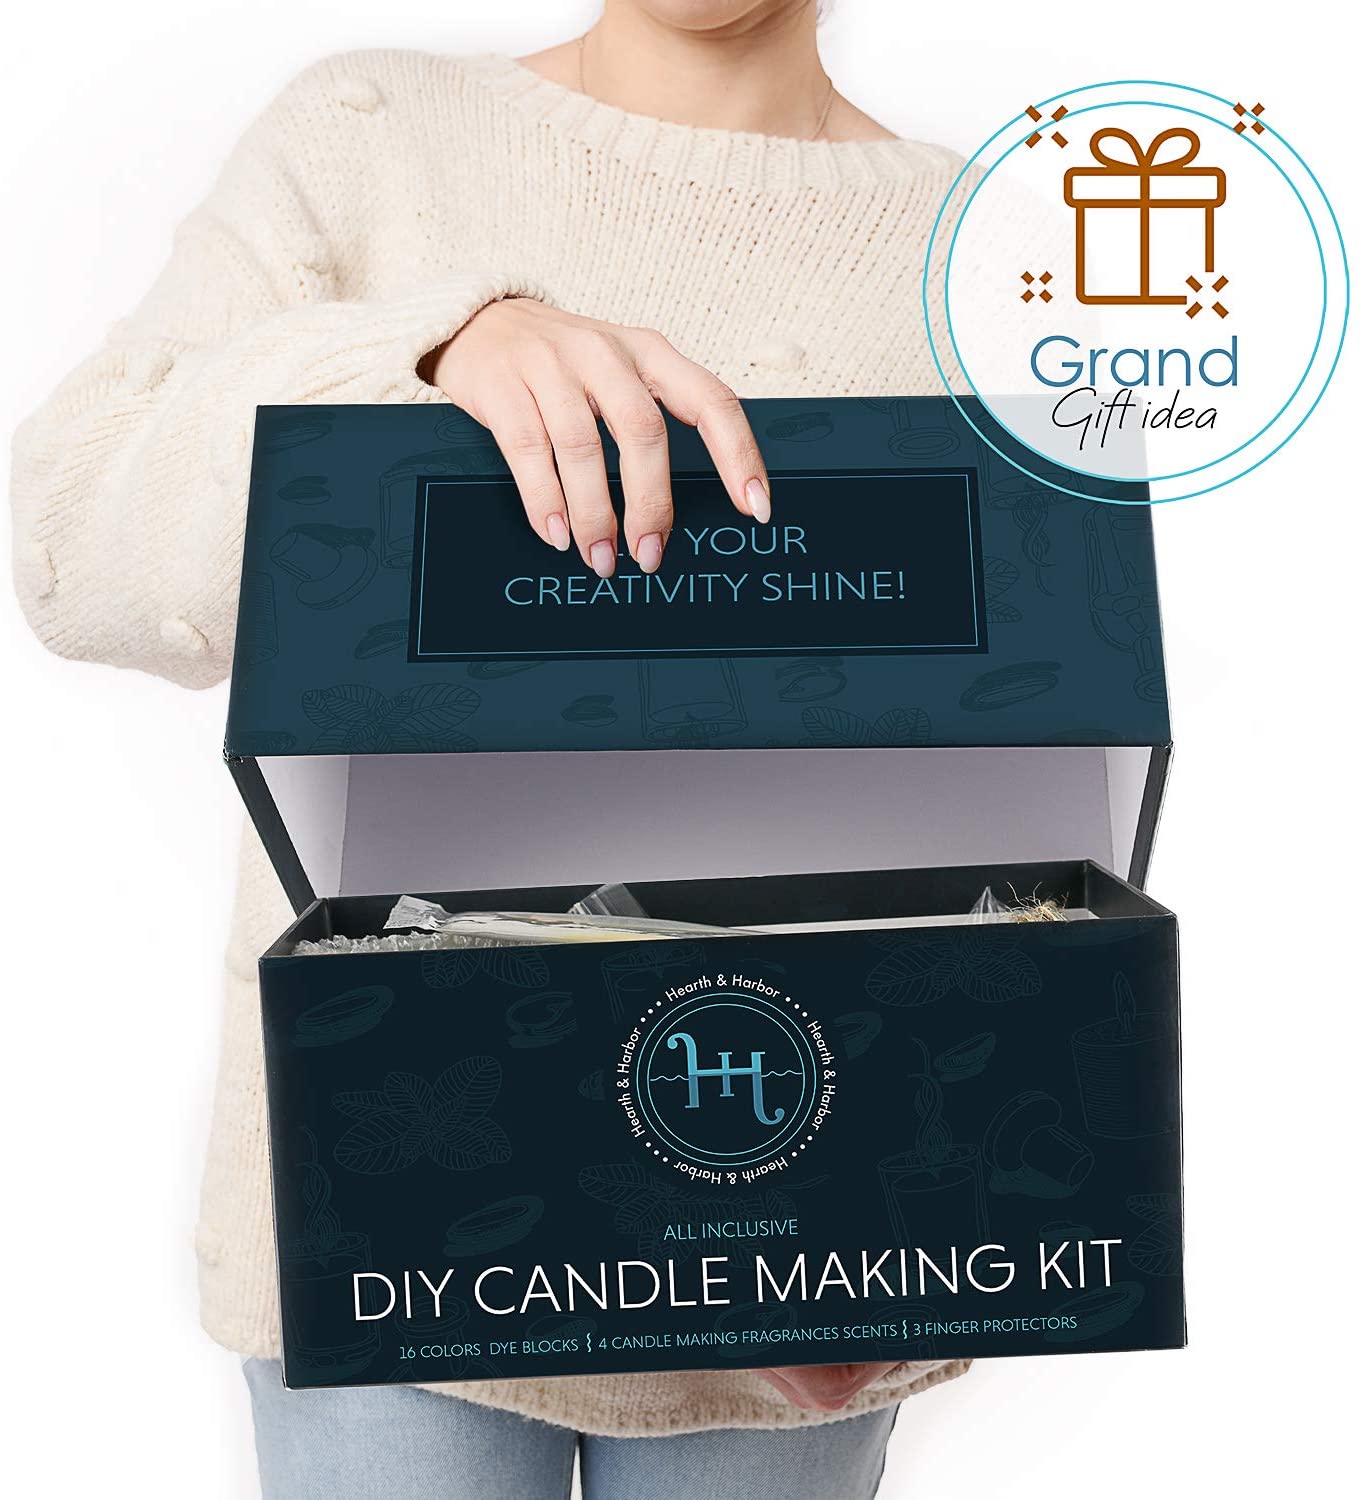 Hearth & Harbor Soy Candle Making Kit - Candle Wax for Candle Making 